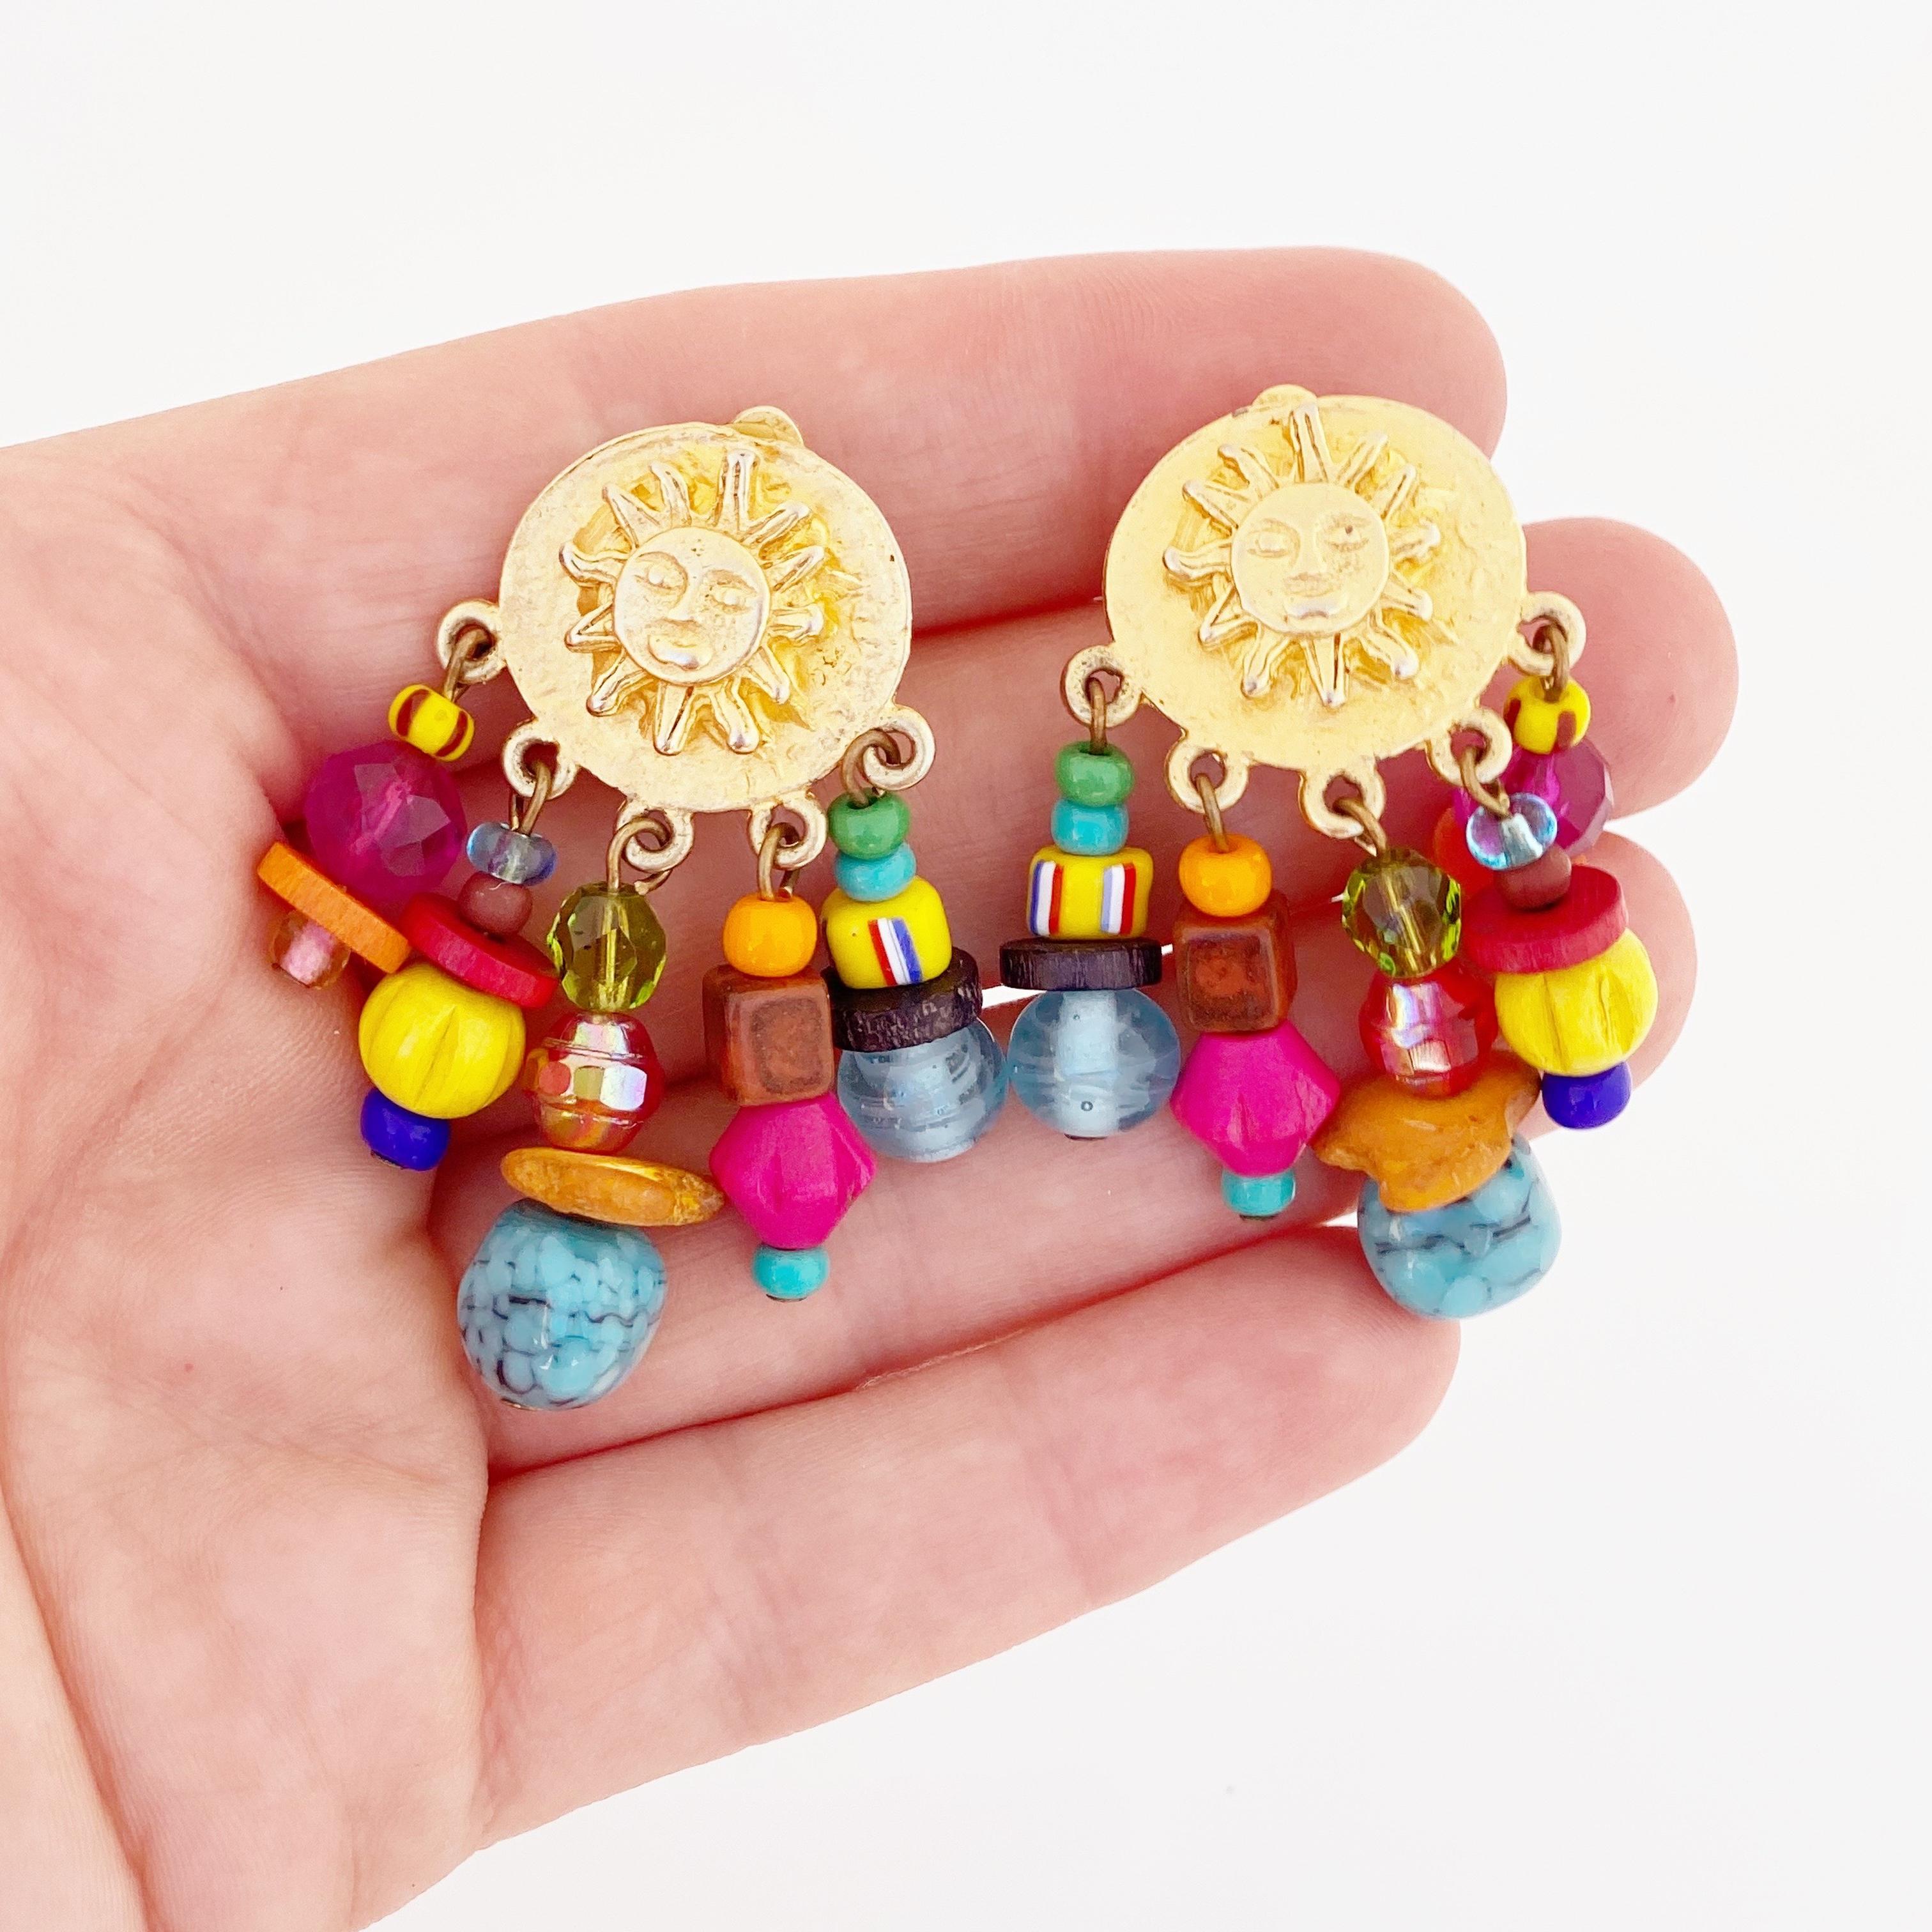 Women's Gold Sun Disc Earrings With Colorful Bead Dangles By RJ Graziano, 1990s